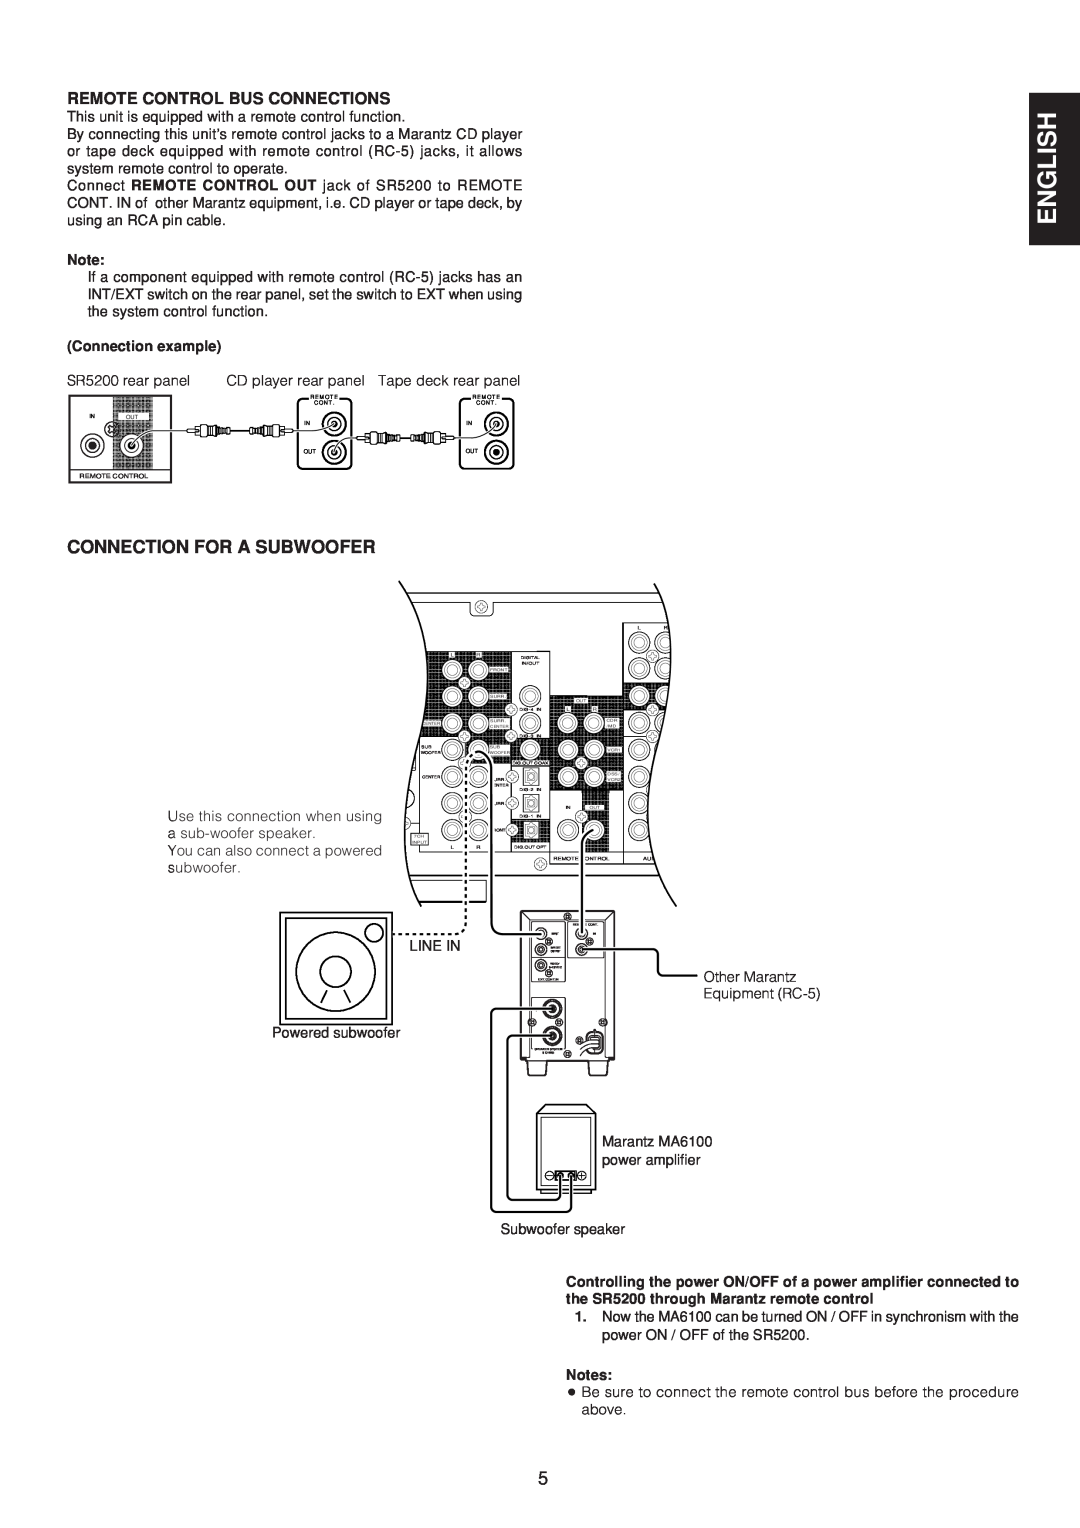 Marantz SR5200 manual English, Connection For A Subwoofer, Remote Control Bus Connections, Connection example 